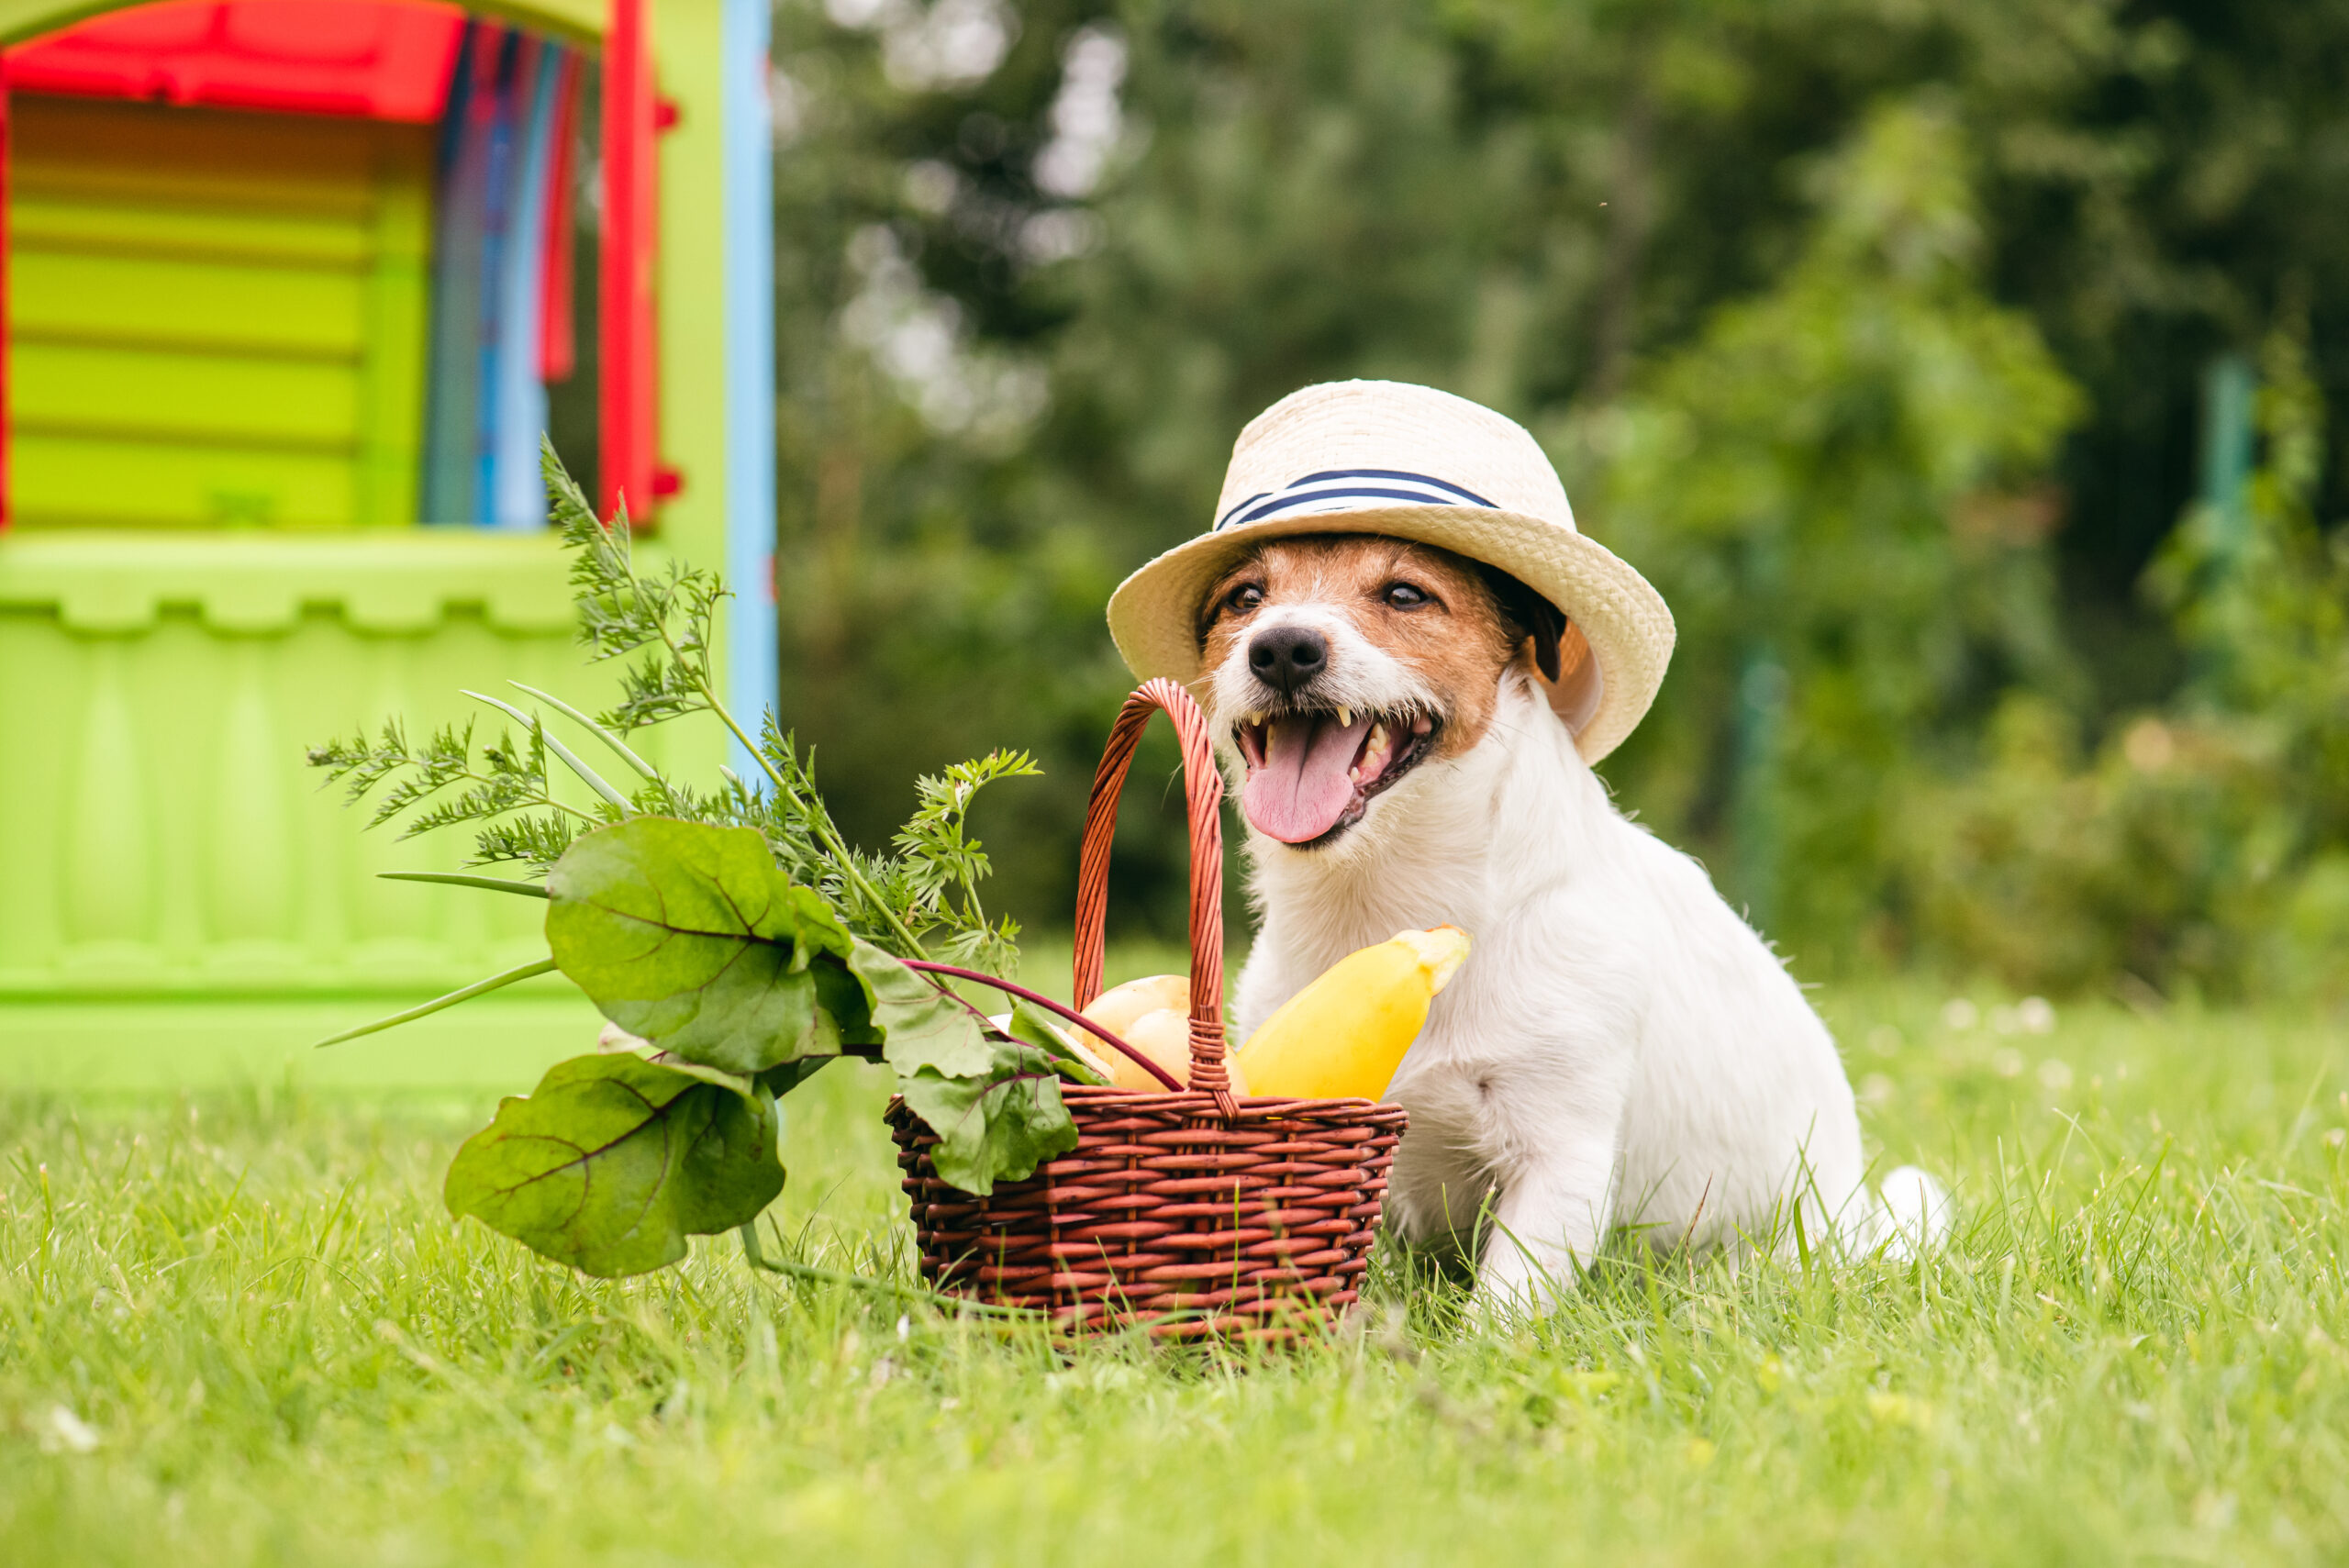 Dog,Next,To,Basket,Full,Of,Natural,Fresh,Food,From